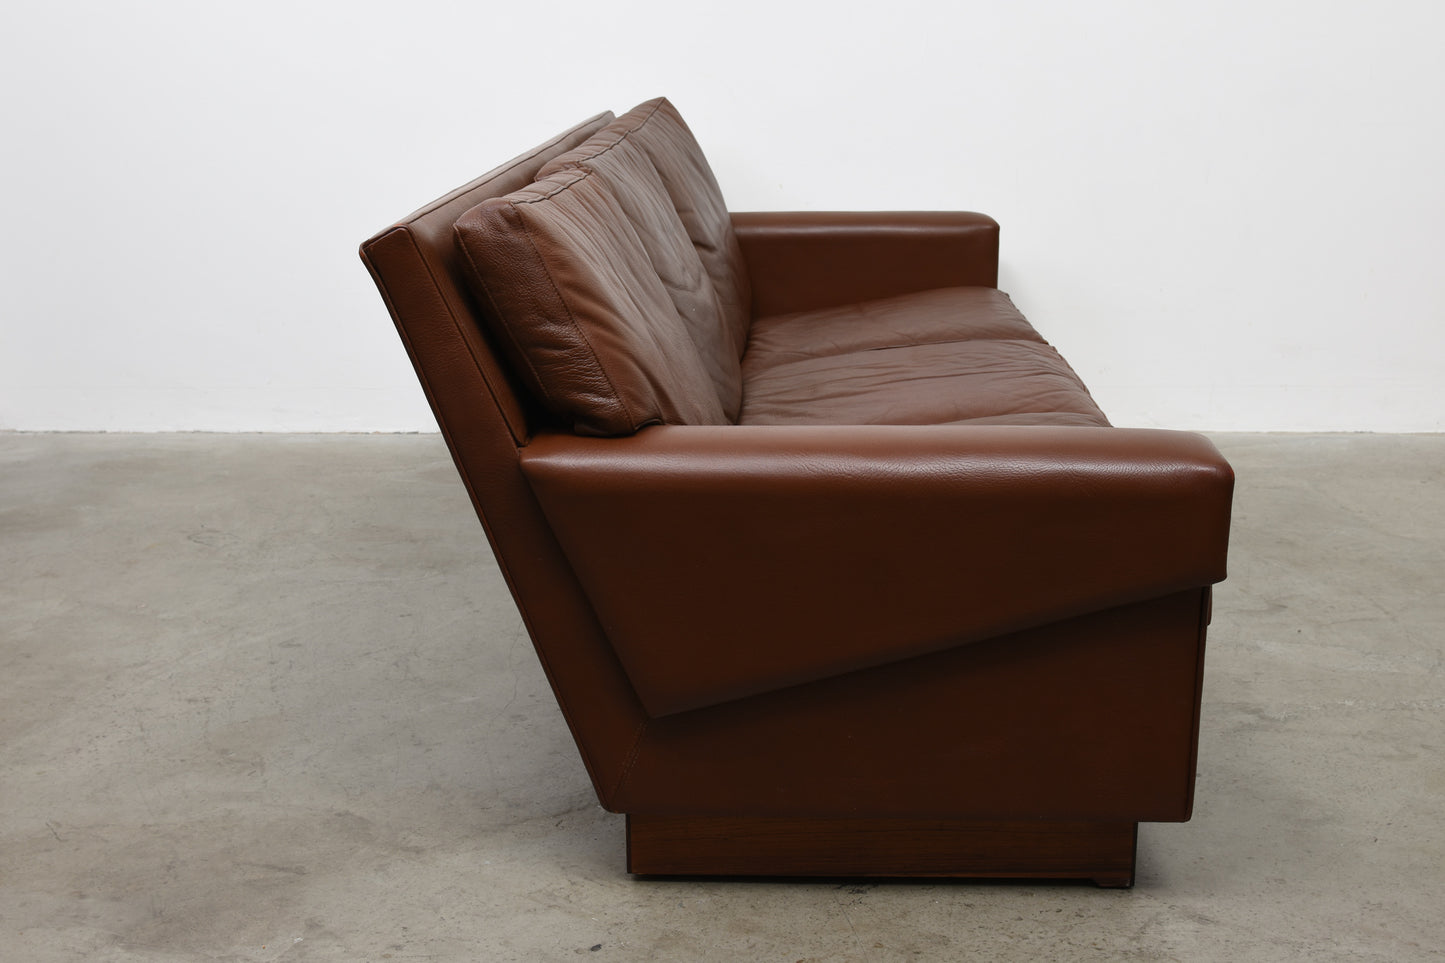 1970s leather three seater